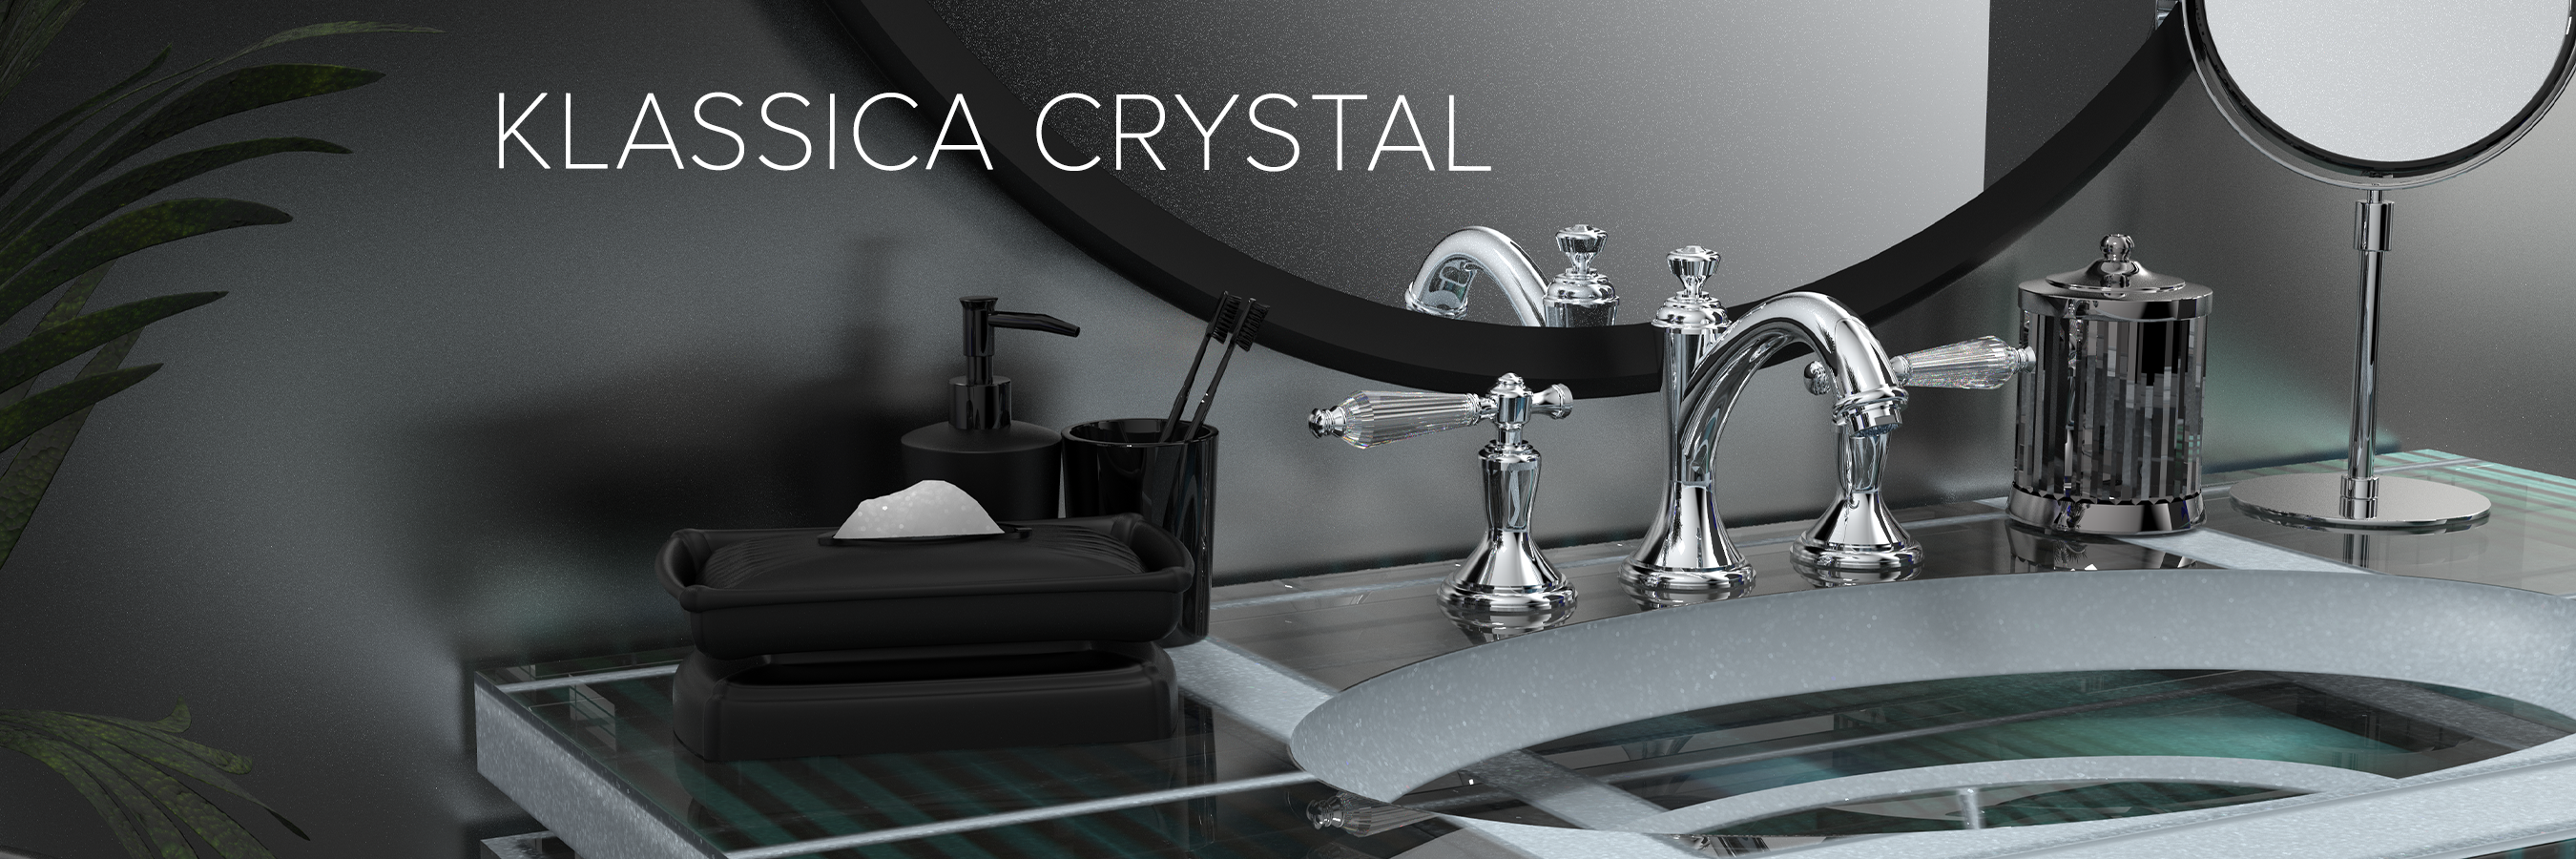 SANTEC POPULAR CRYSTAL ALL SOLID BRASS DESIGN LUXURY LAVATORY WIDESPREAD FAUCET FOR BATHROOM AND SHOWER